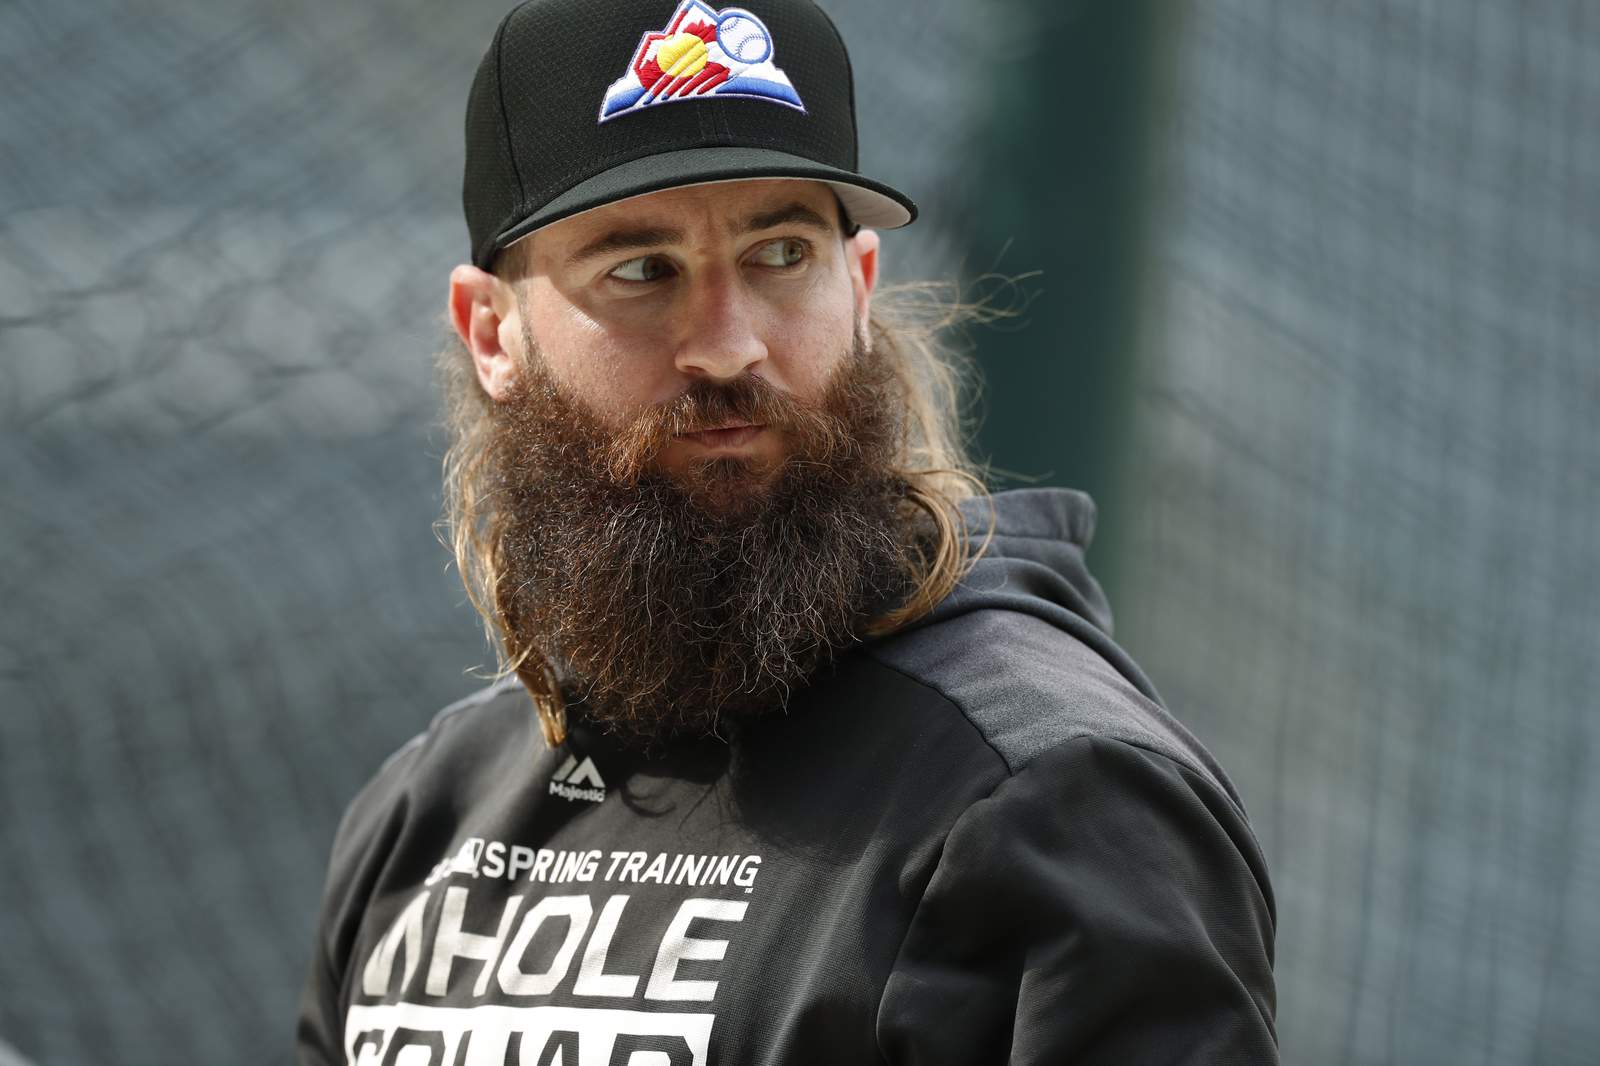 Blackmon returns to Rockies after recovering from COVID-19